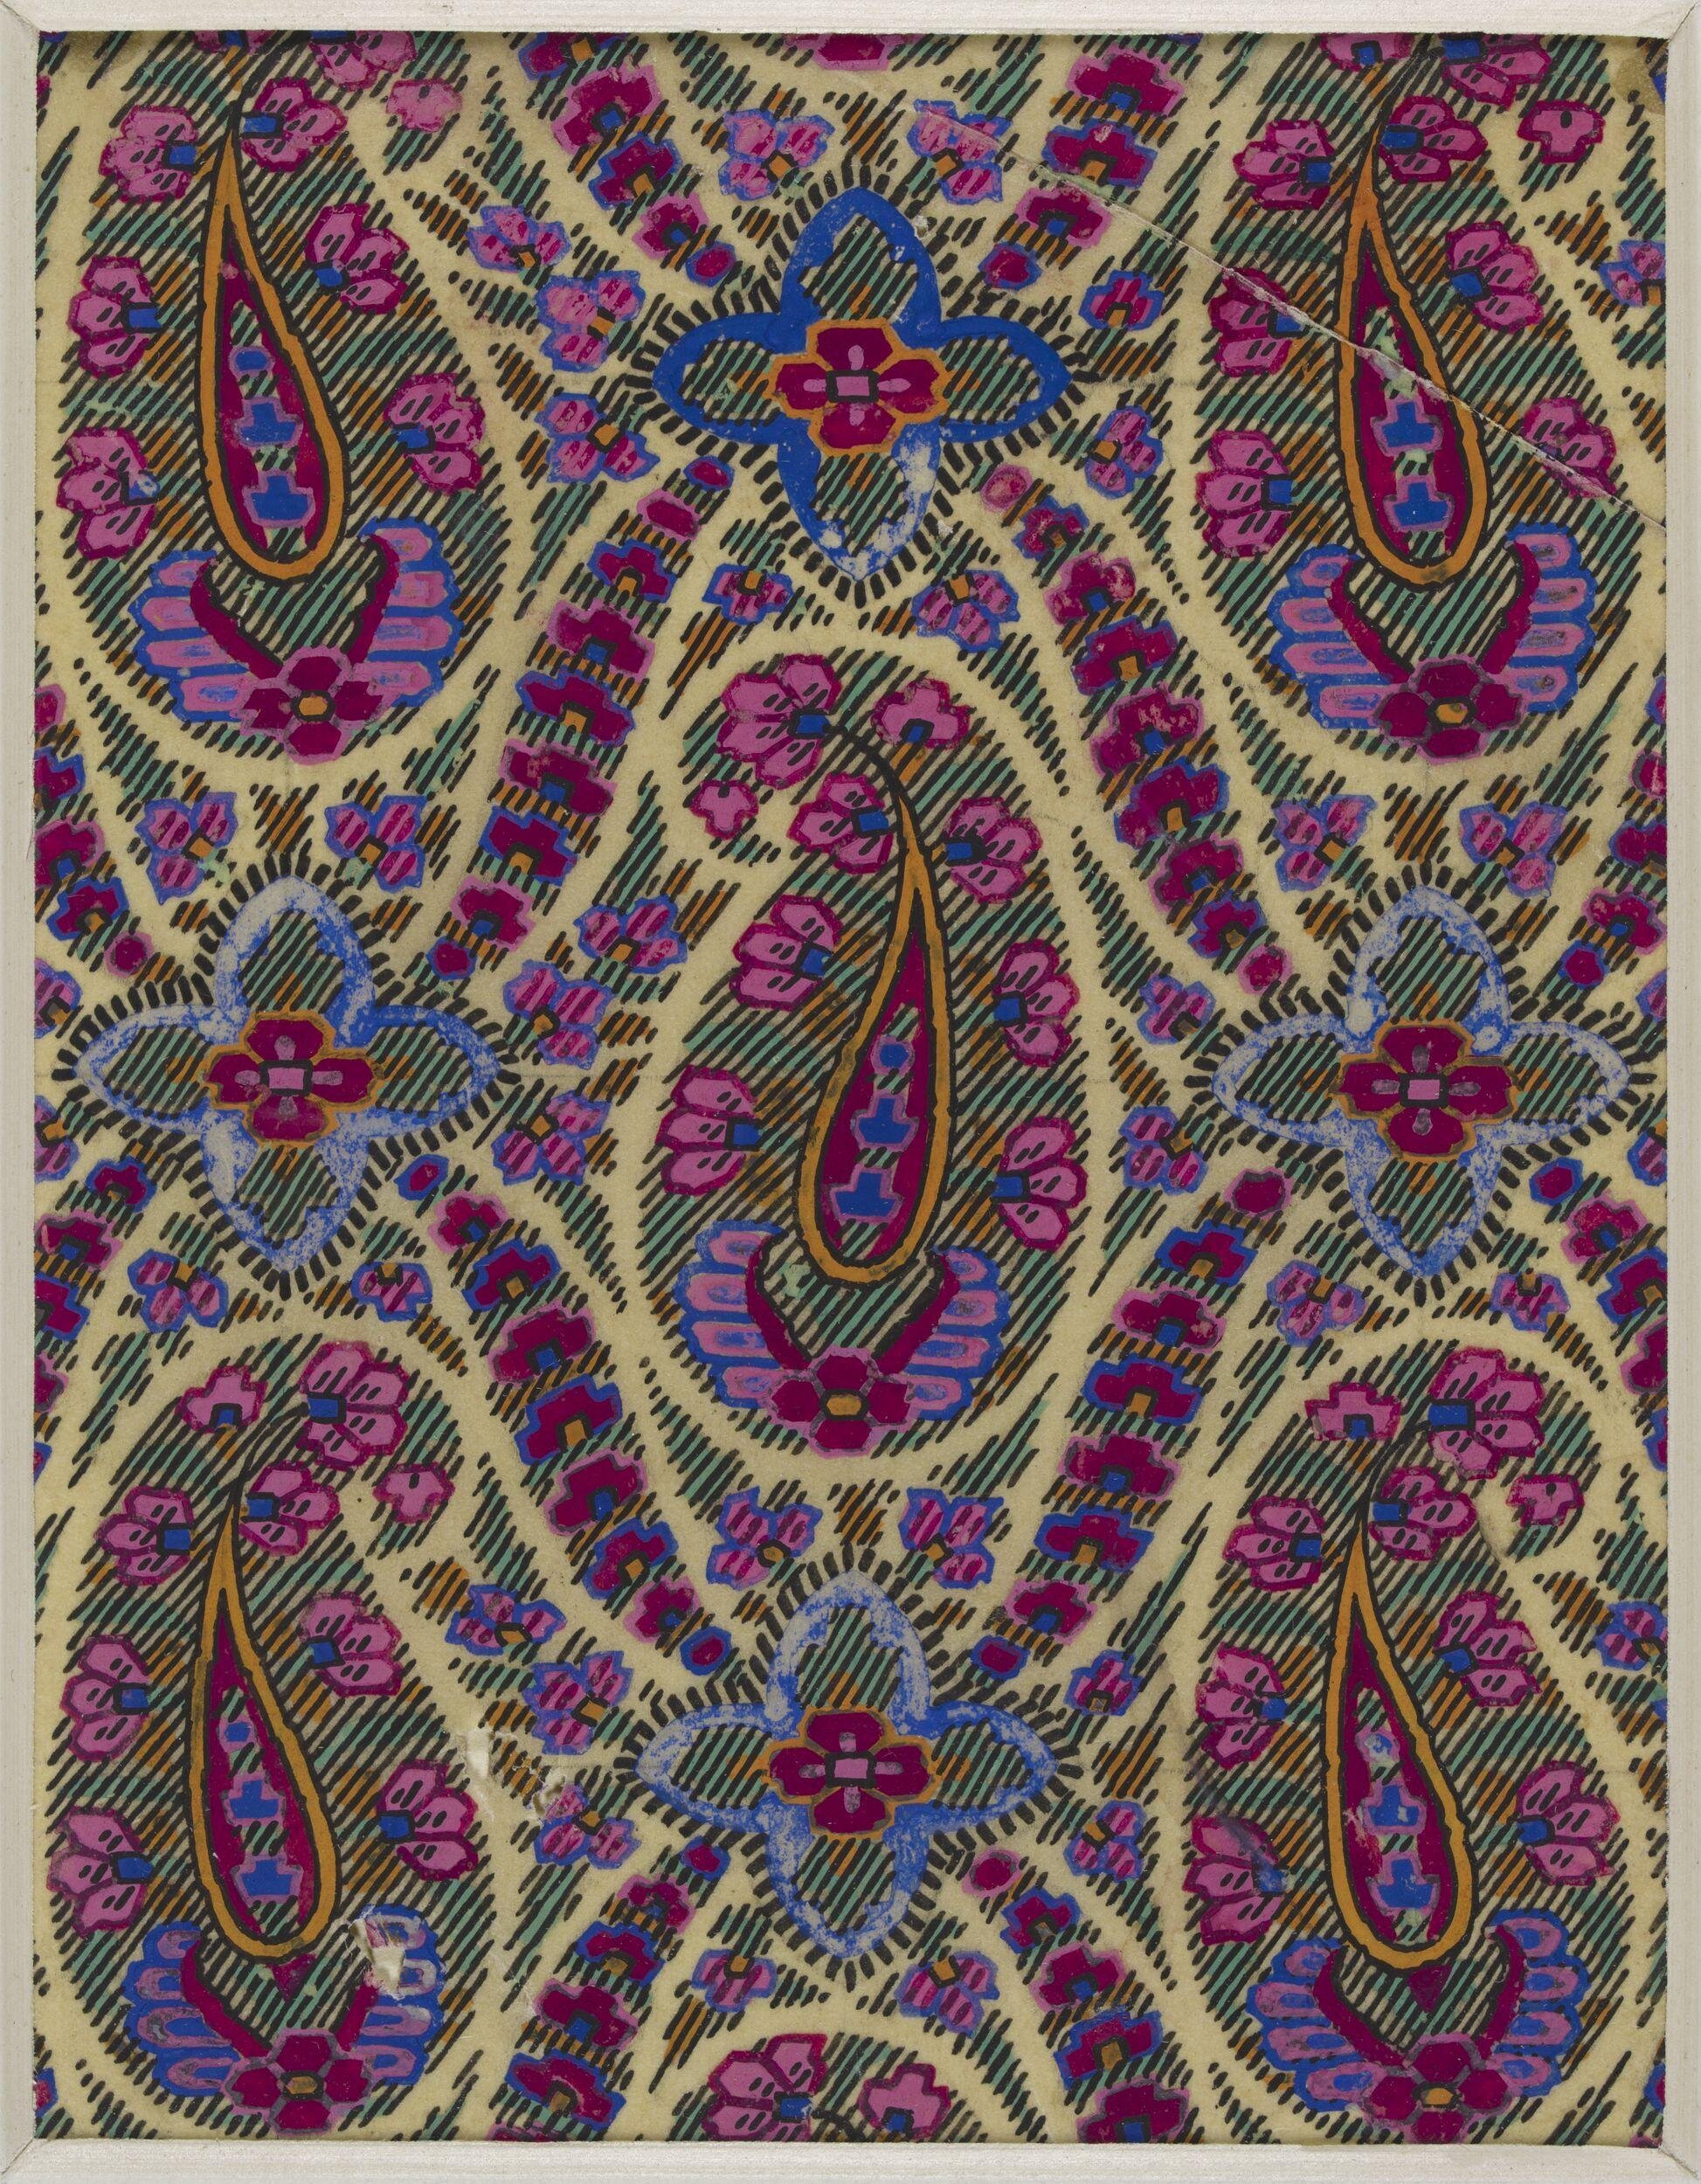 Paisley: The story of a classic bohemian print - BBC Culture